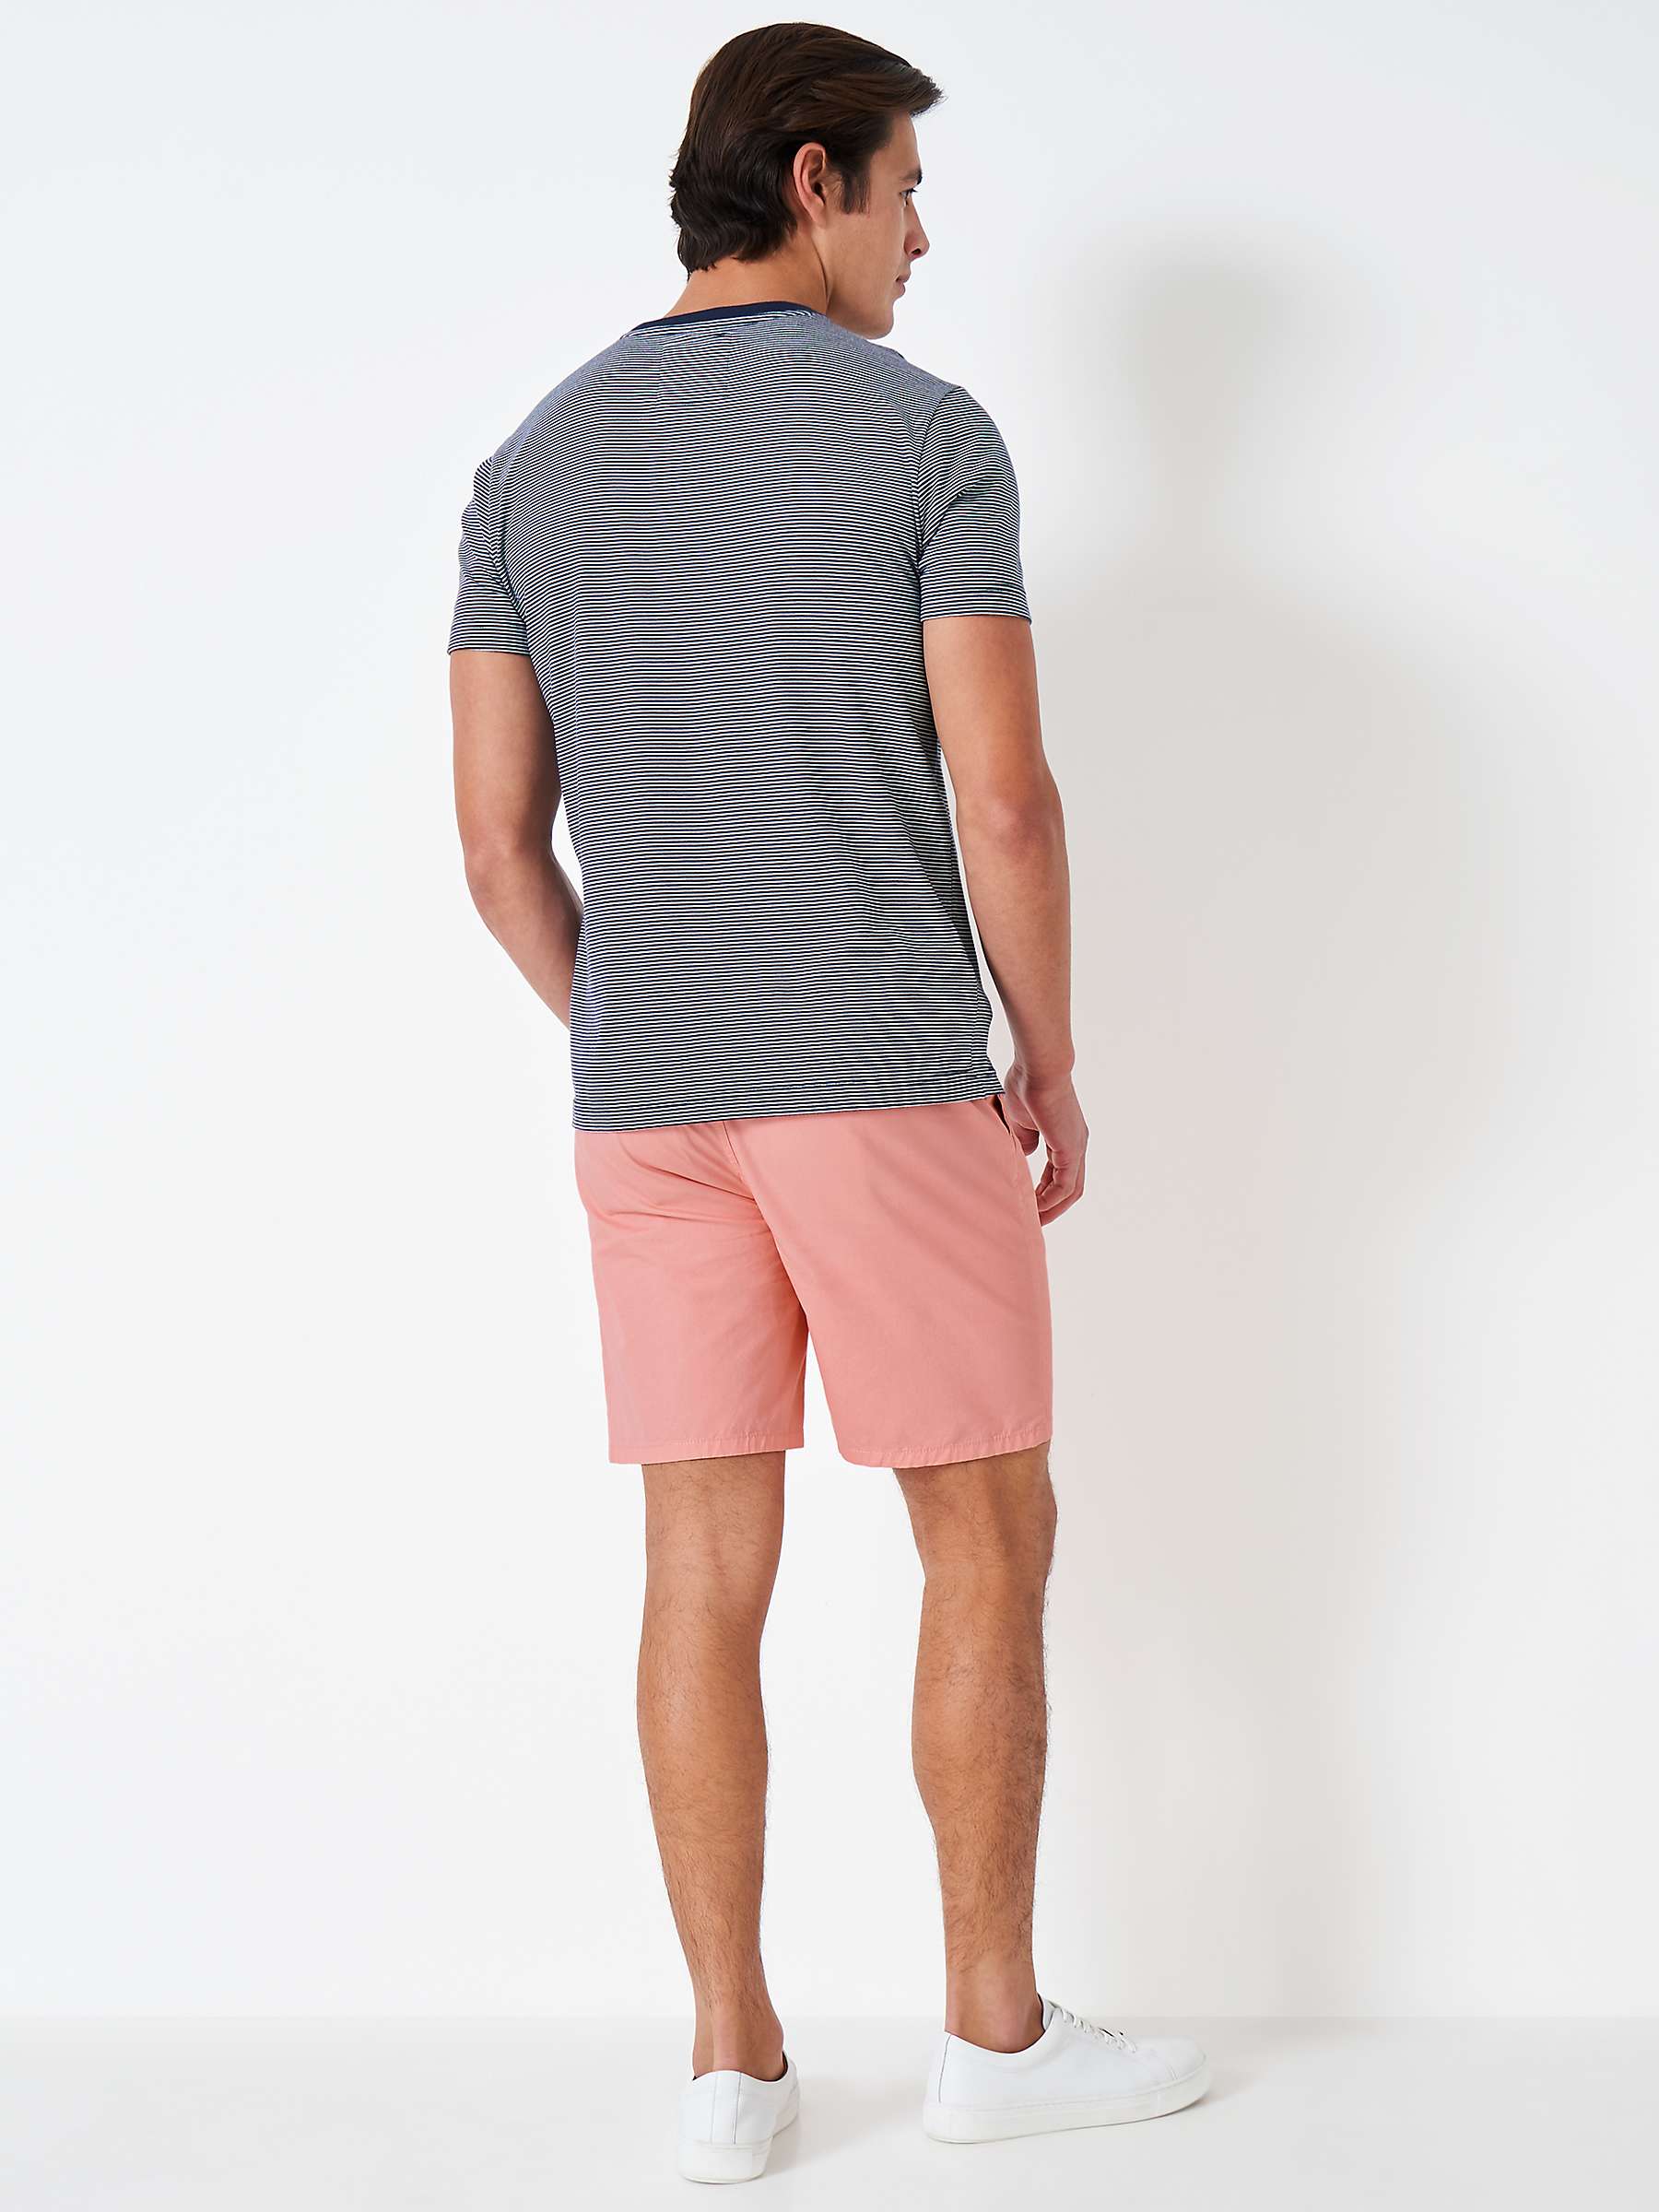 Buy Crew Clothing Deck Shorts Online at johnlewis.com